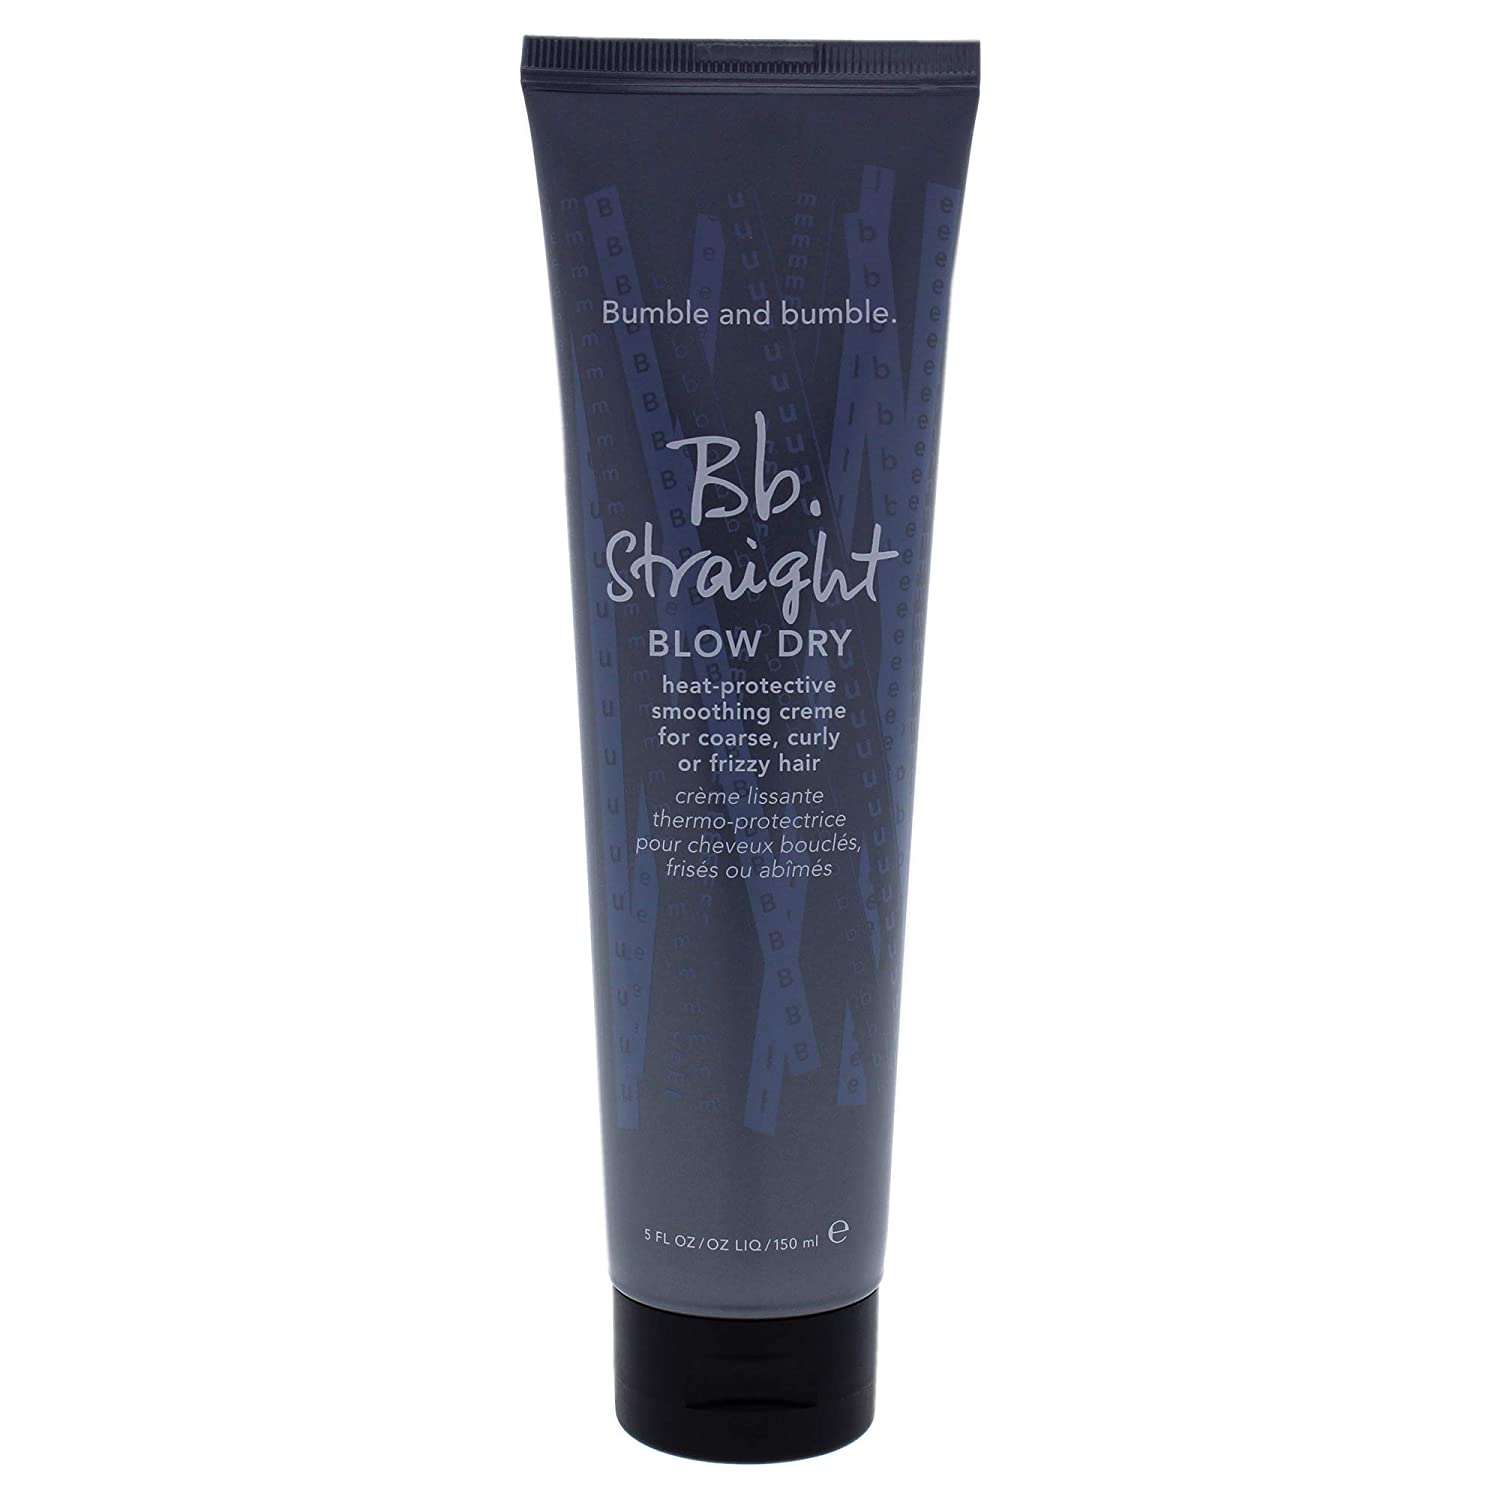 hair straightening products - Bumble & Bumble Straight Blow Dry Balm